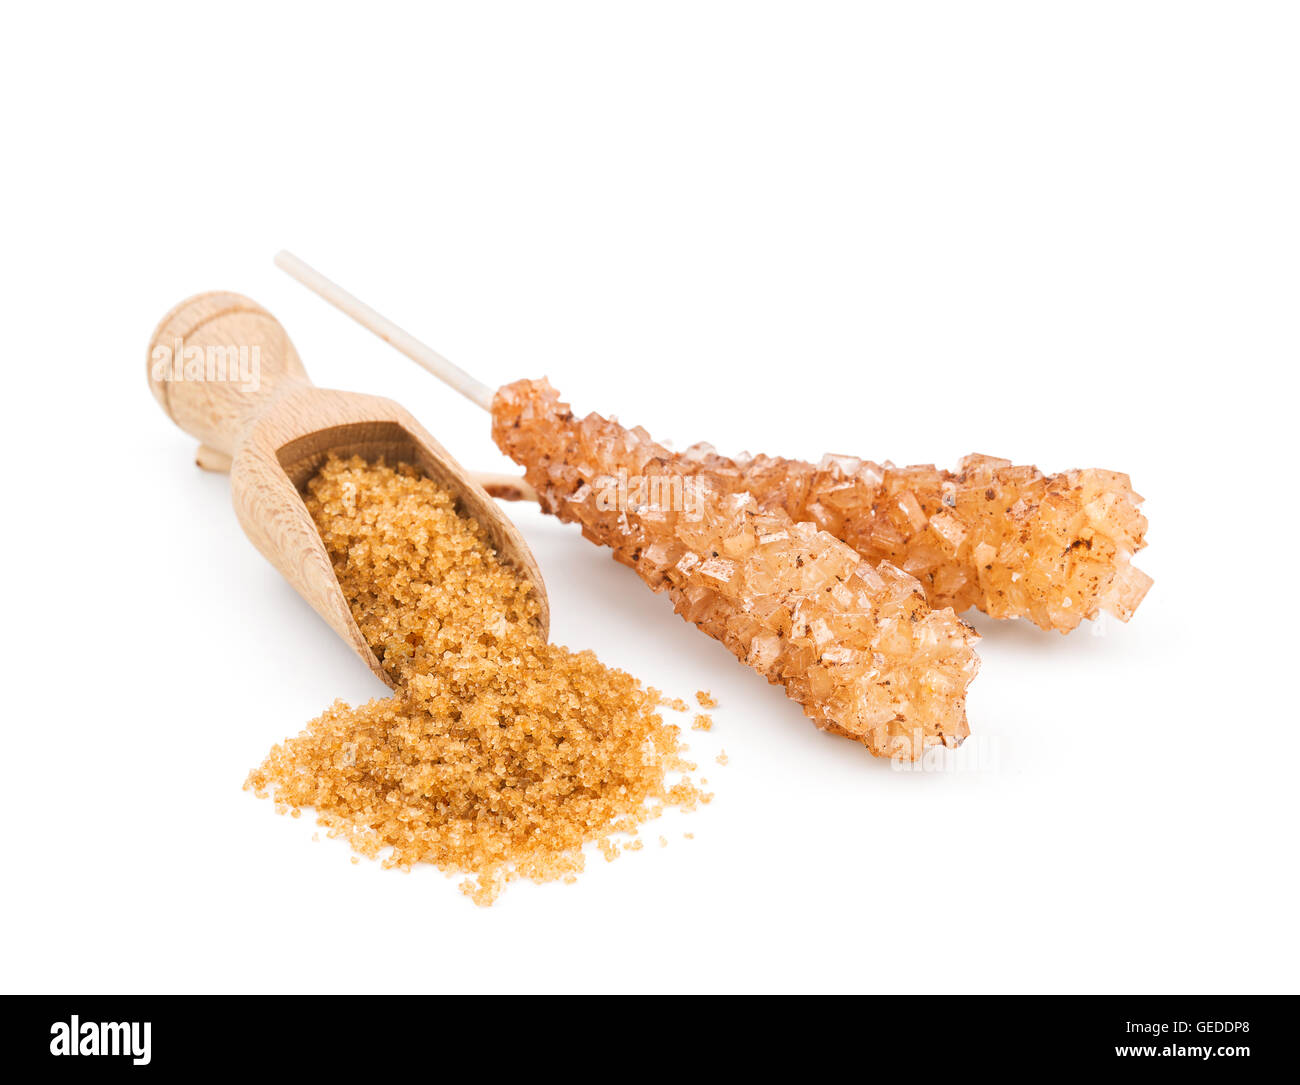 Brown sugar in a wooden scoop isolated on white Stock Photo